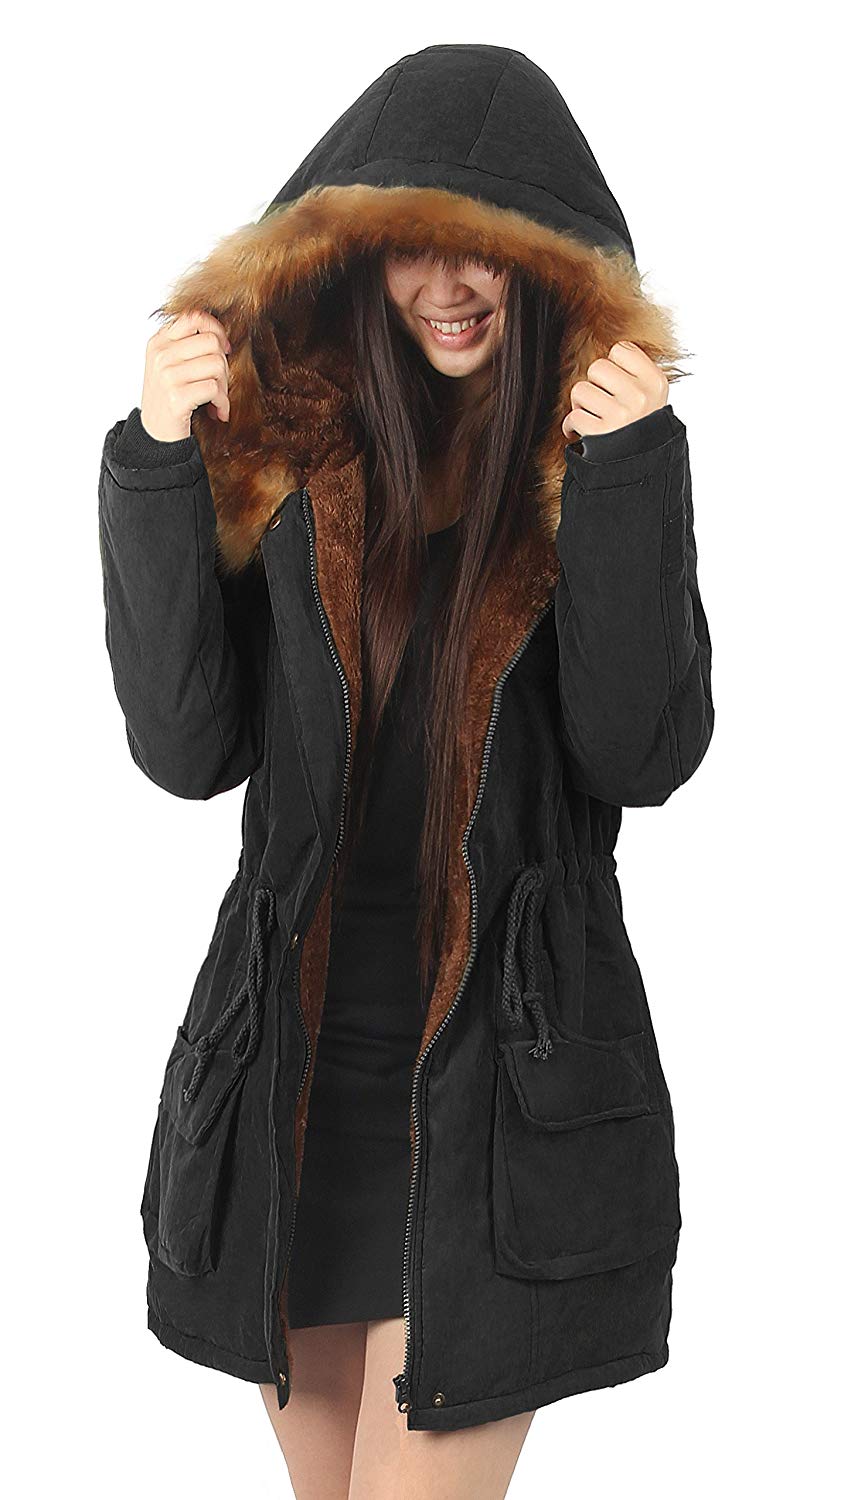 Hooded Parkas amazon.com: ilovesia womens hooded warm coats parkas with faux fur jackets:  clothing FXGFTLW